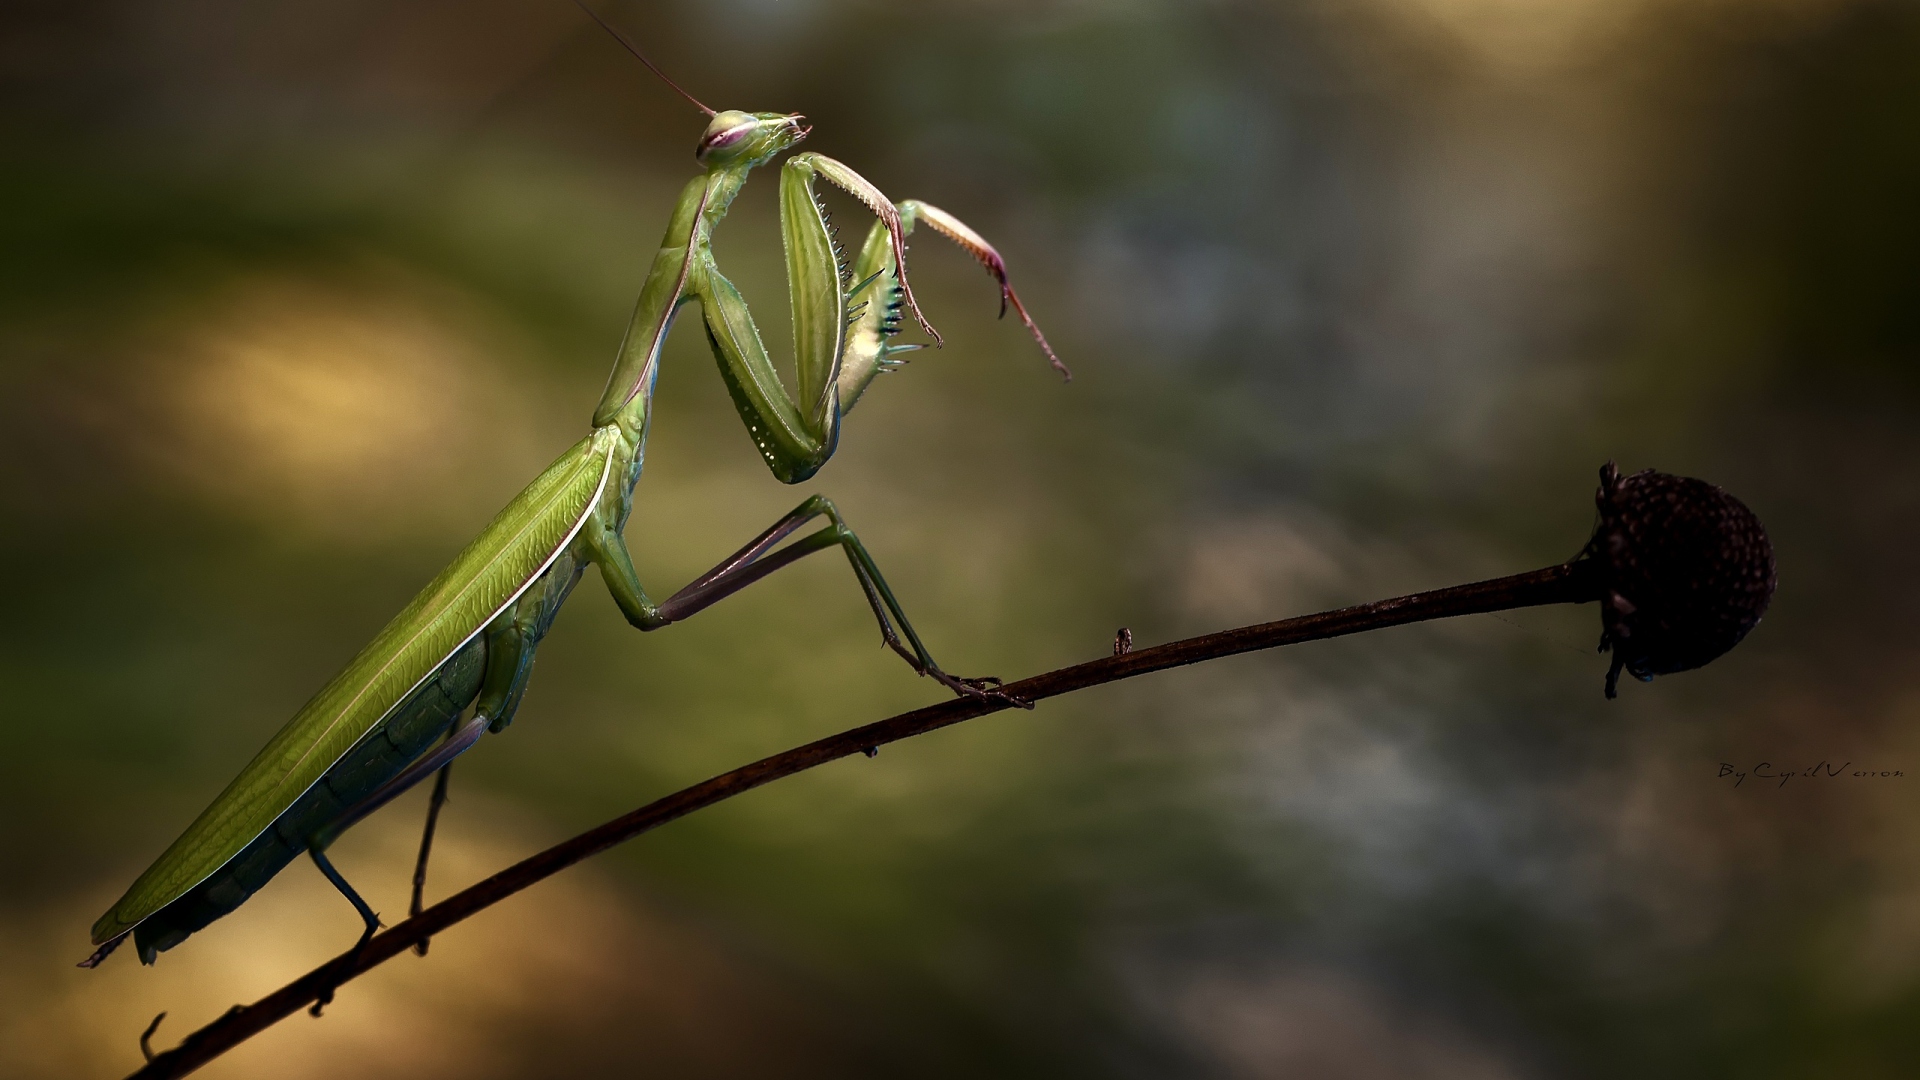 Colorful Photography Insect Nature Closeup Praying Mantis Blurred Blurry Background Simple Backgroun 1920x1080